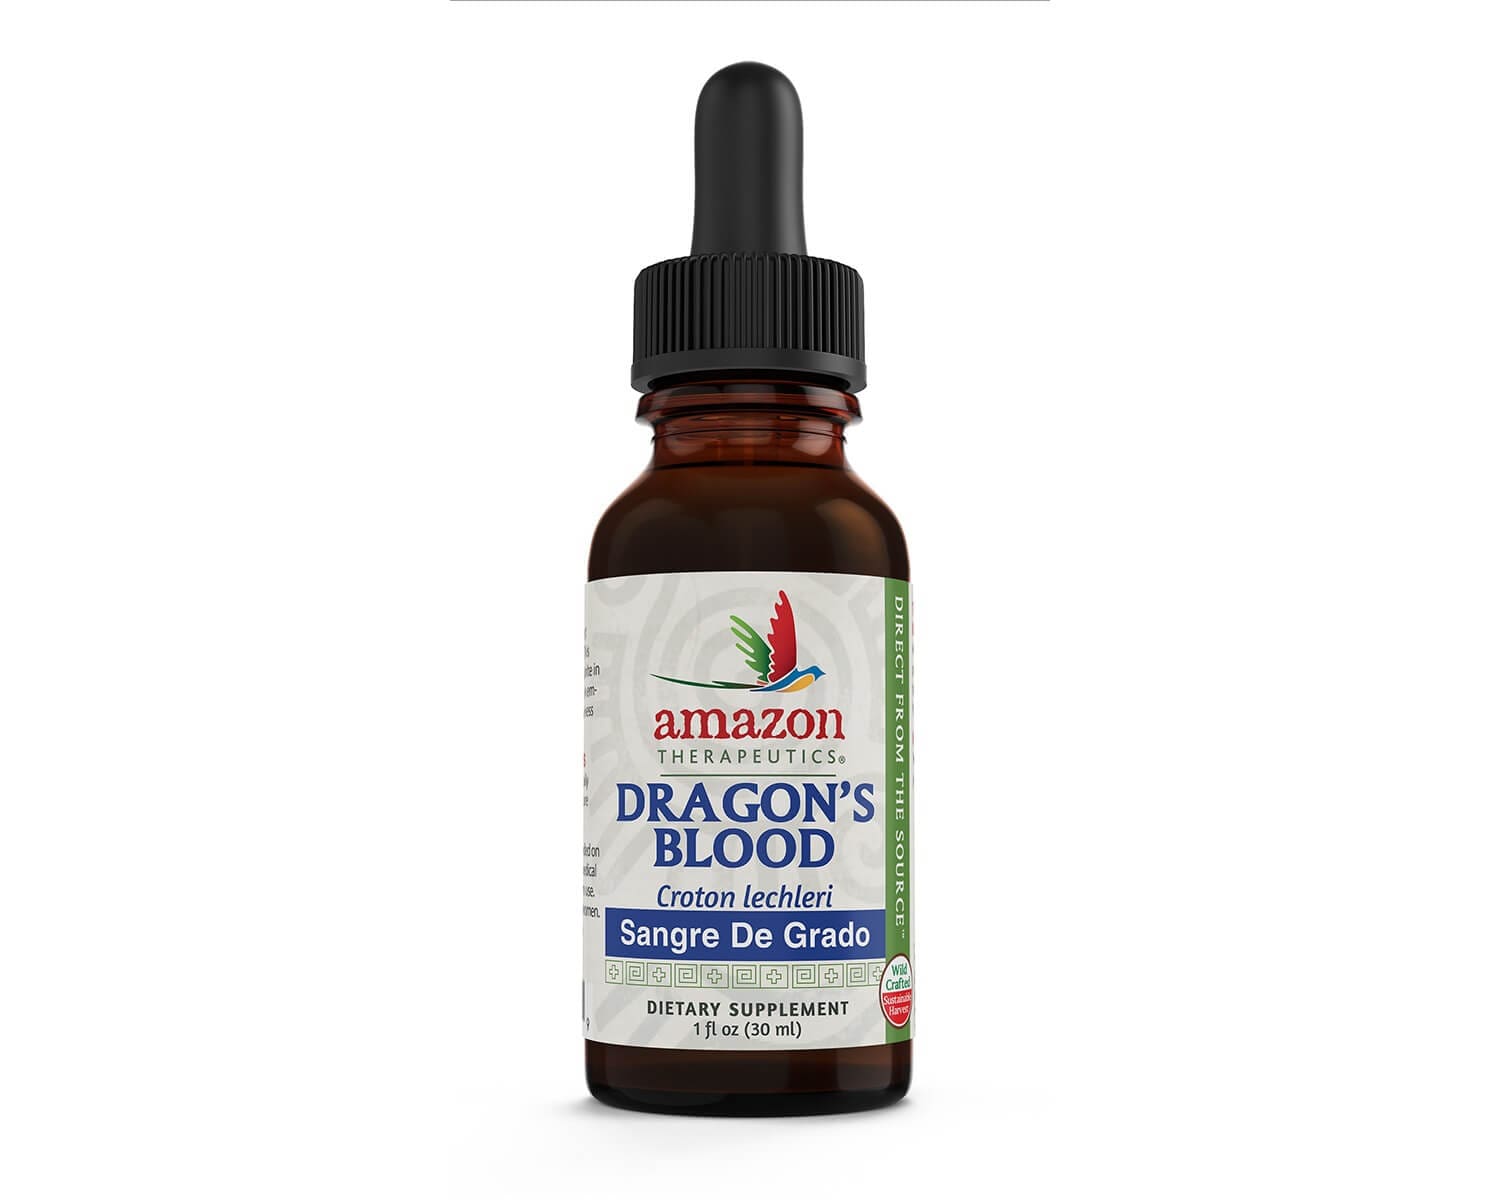 CELESTIAL ® DRAGONS BLOOD EXTRACT Croton Lechleri ANTI AGEING FOR